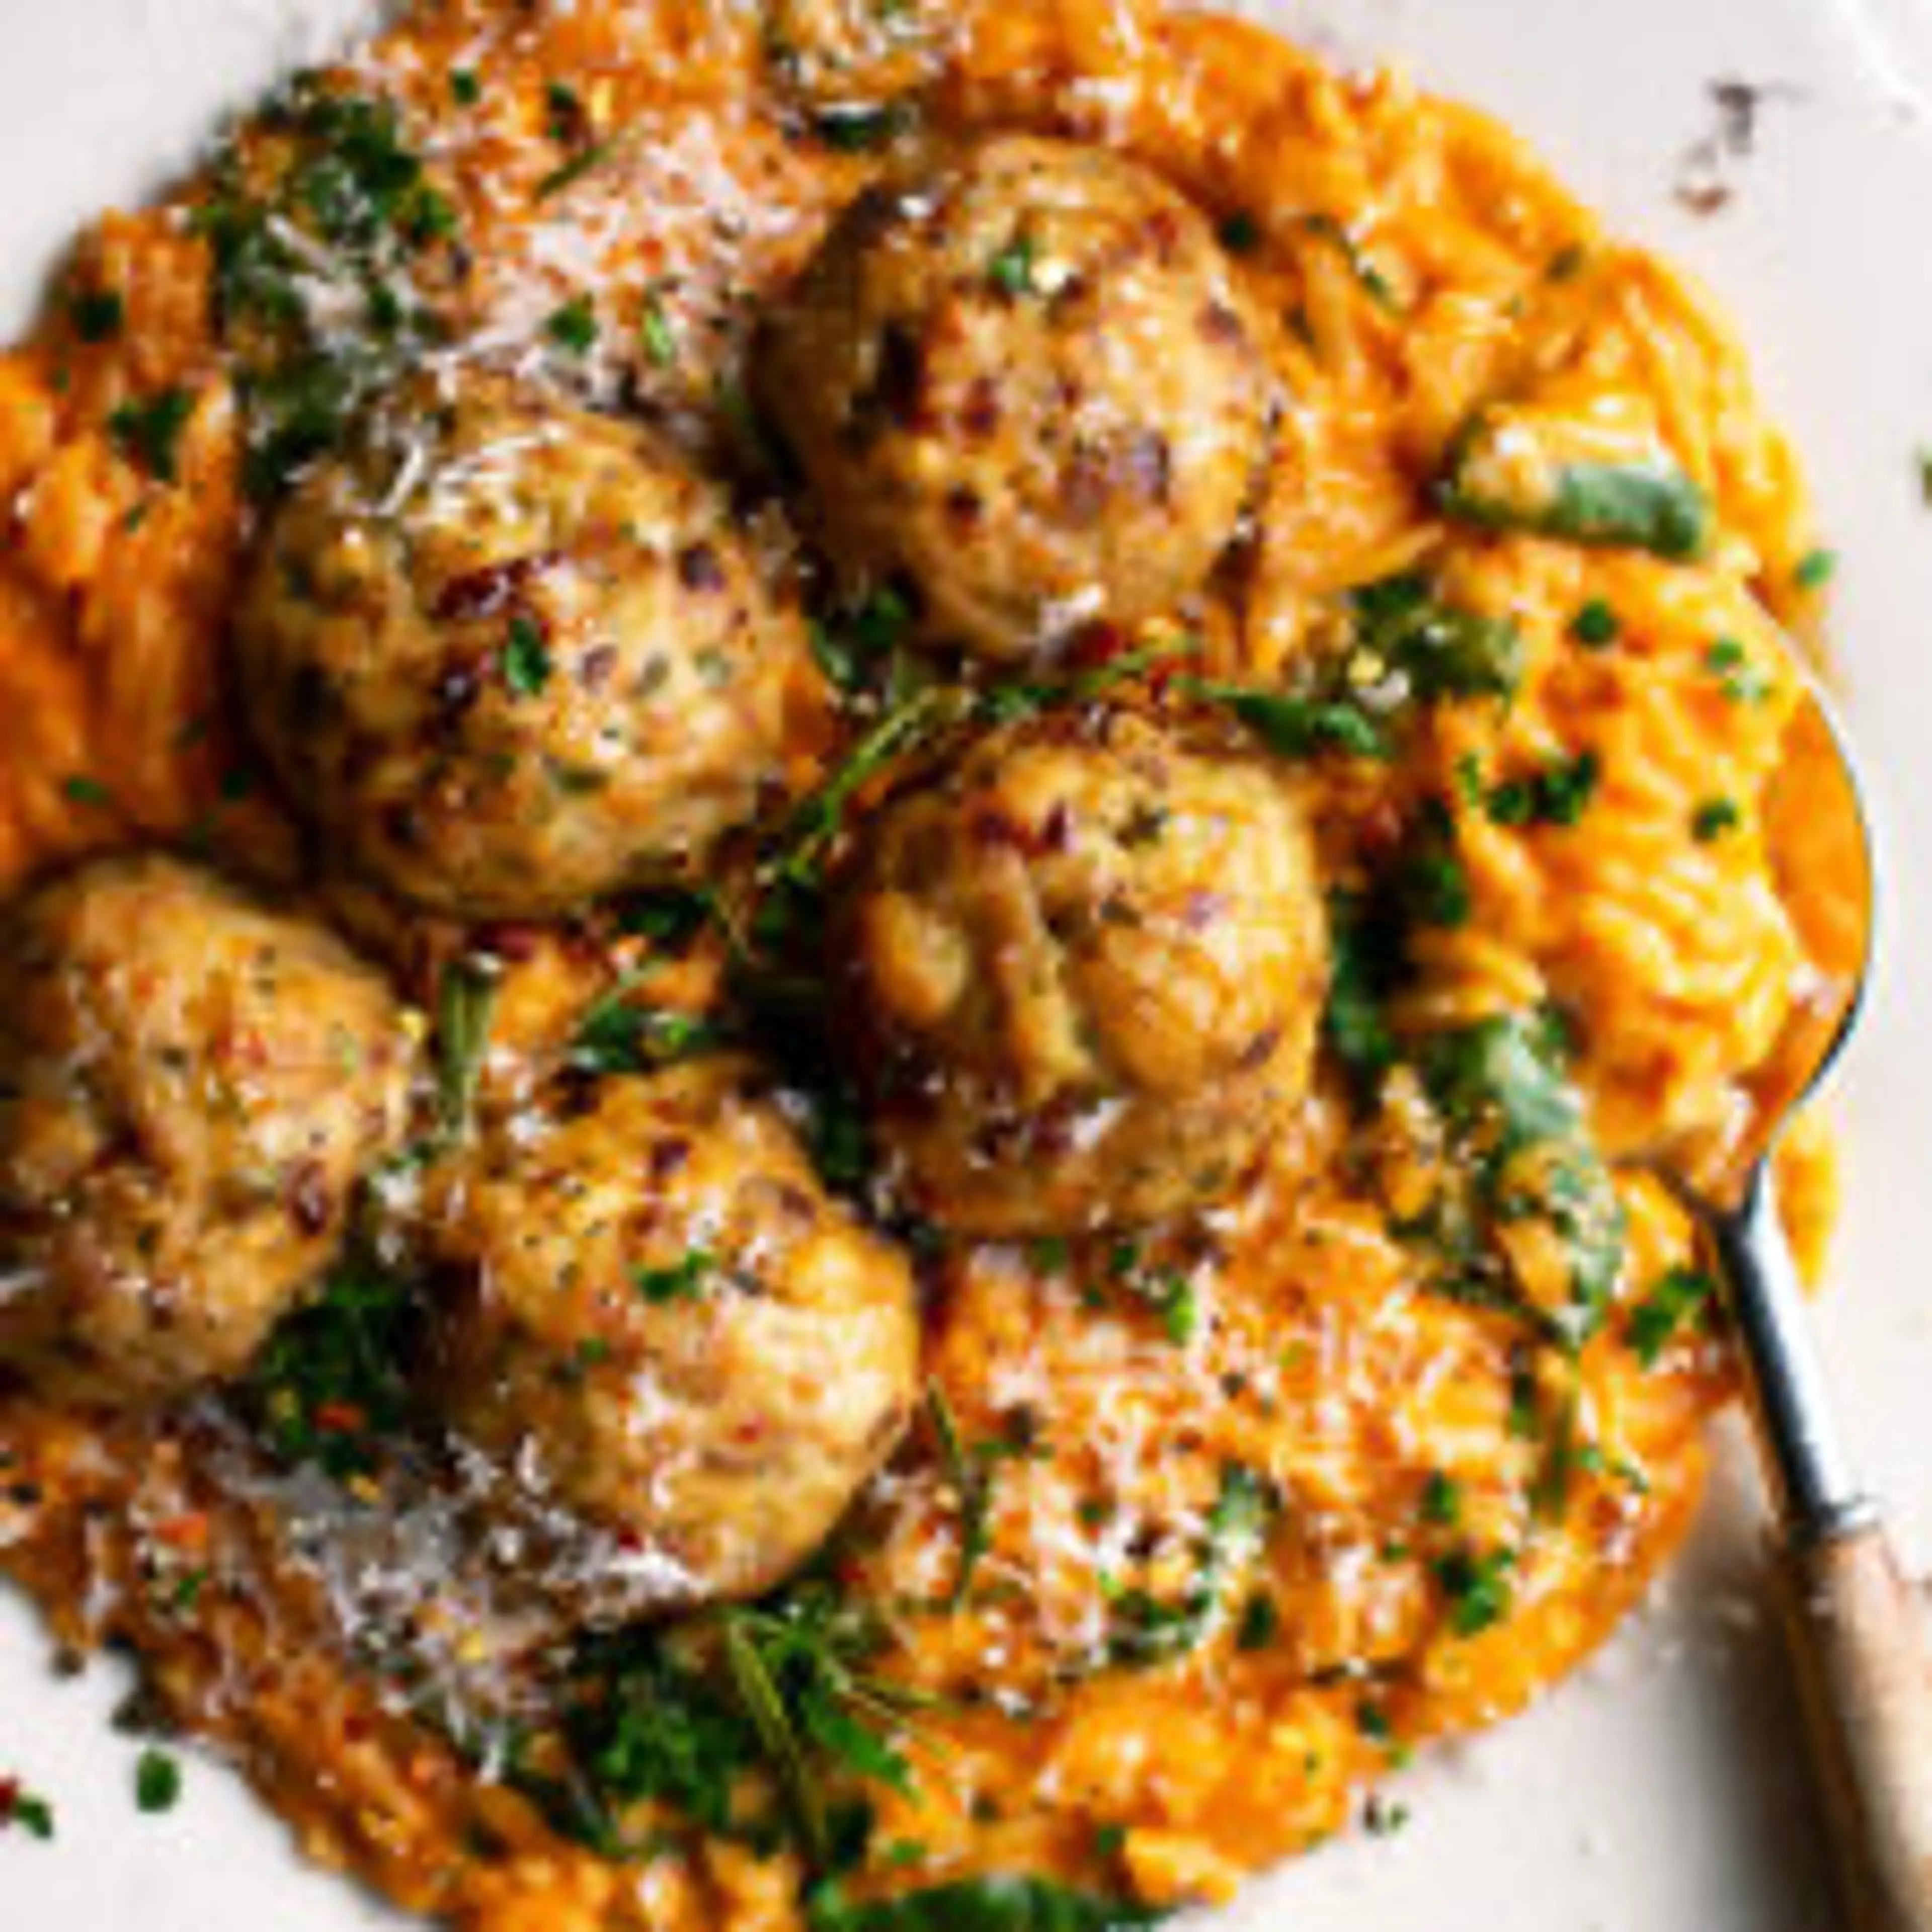 Baked Rosemary Chicken Meatballs with Tomato Orzo